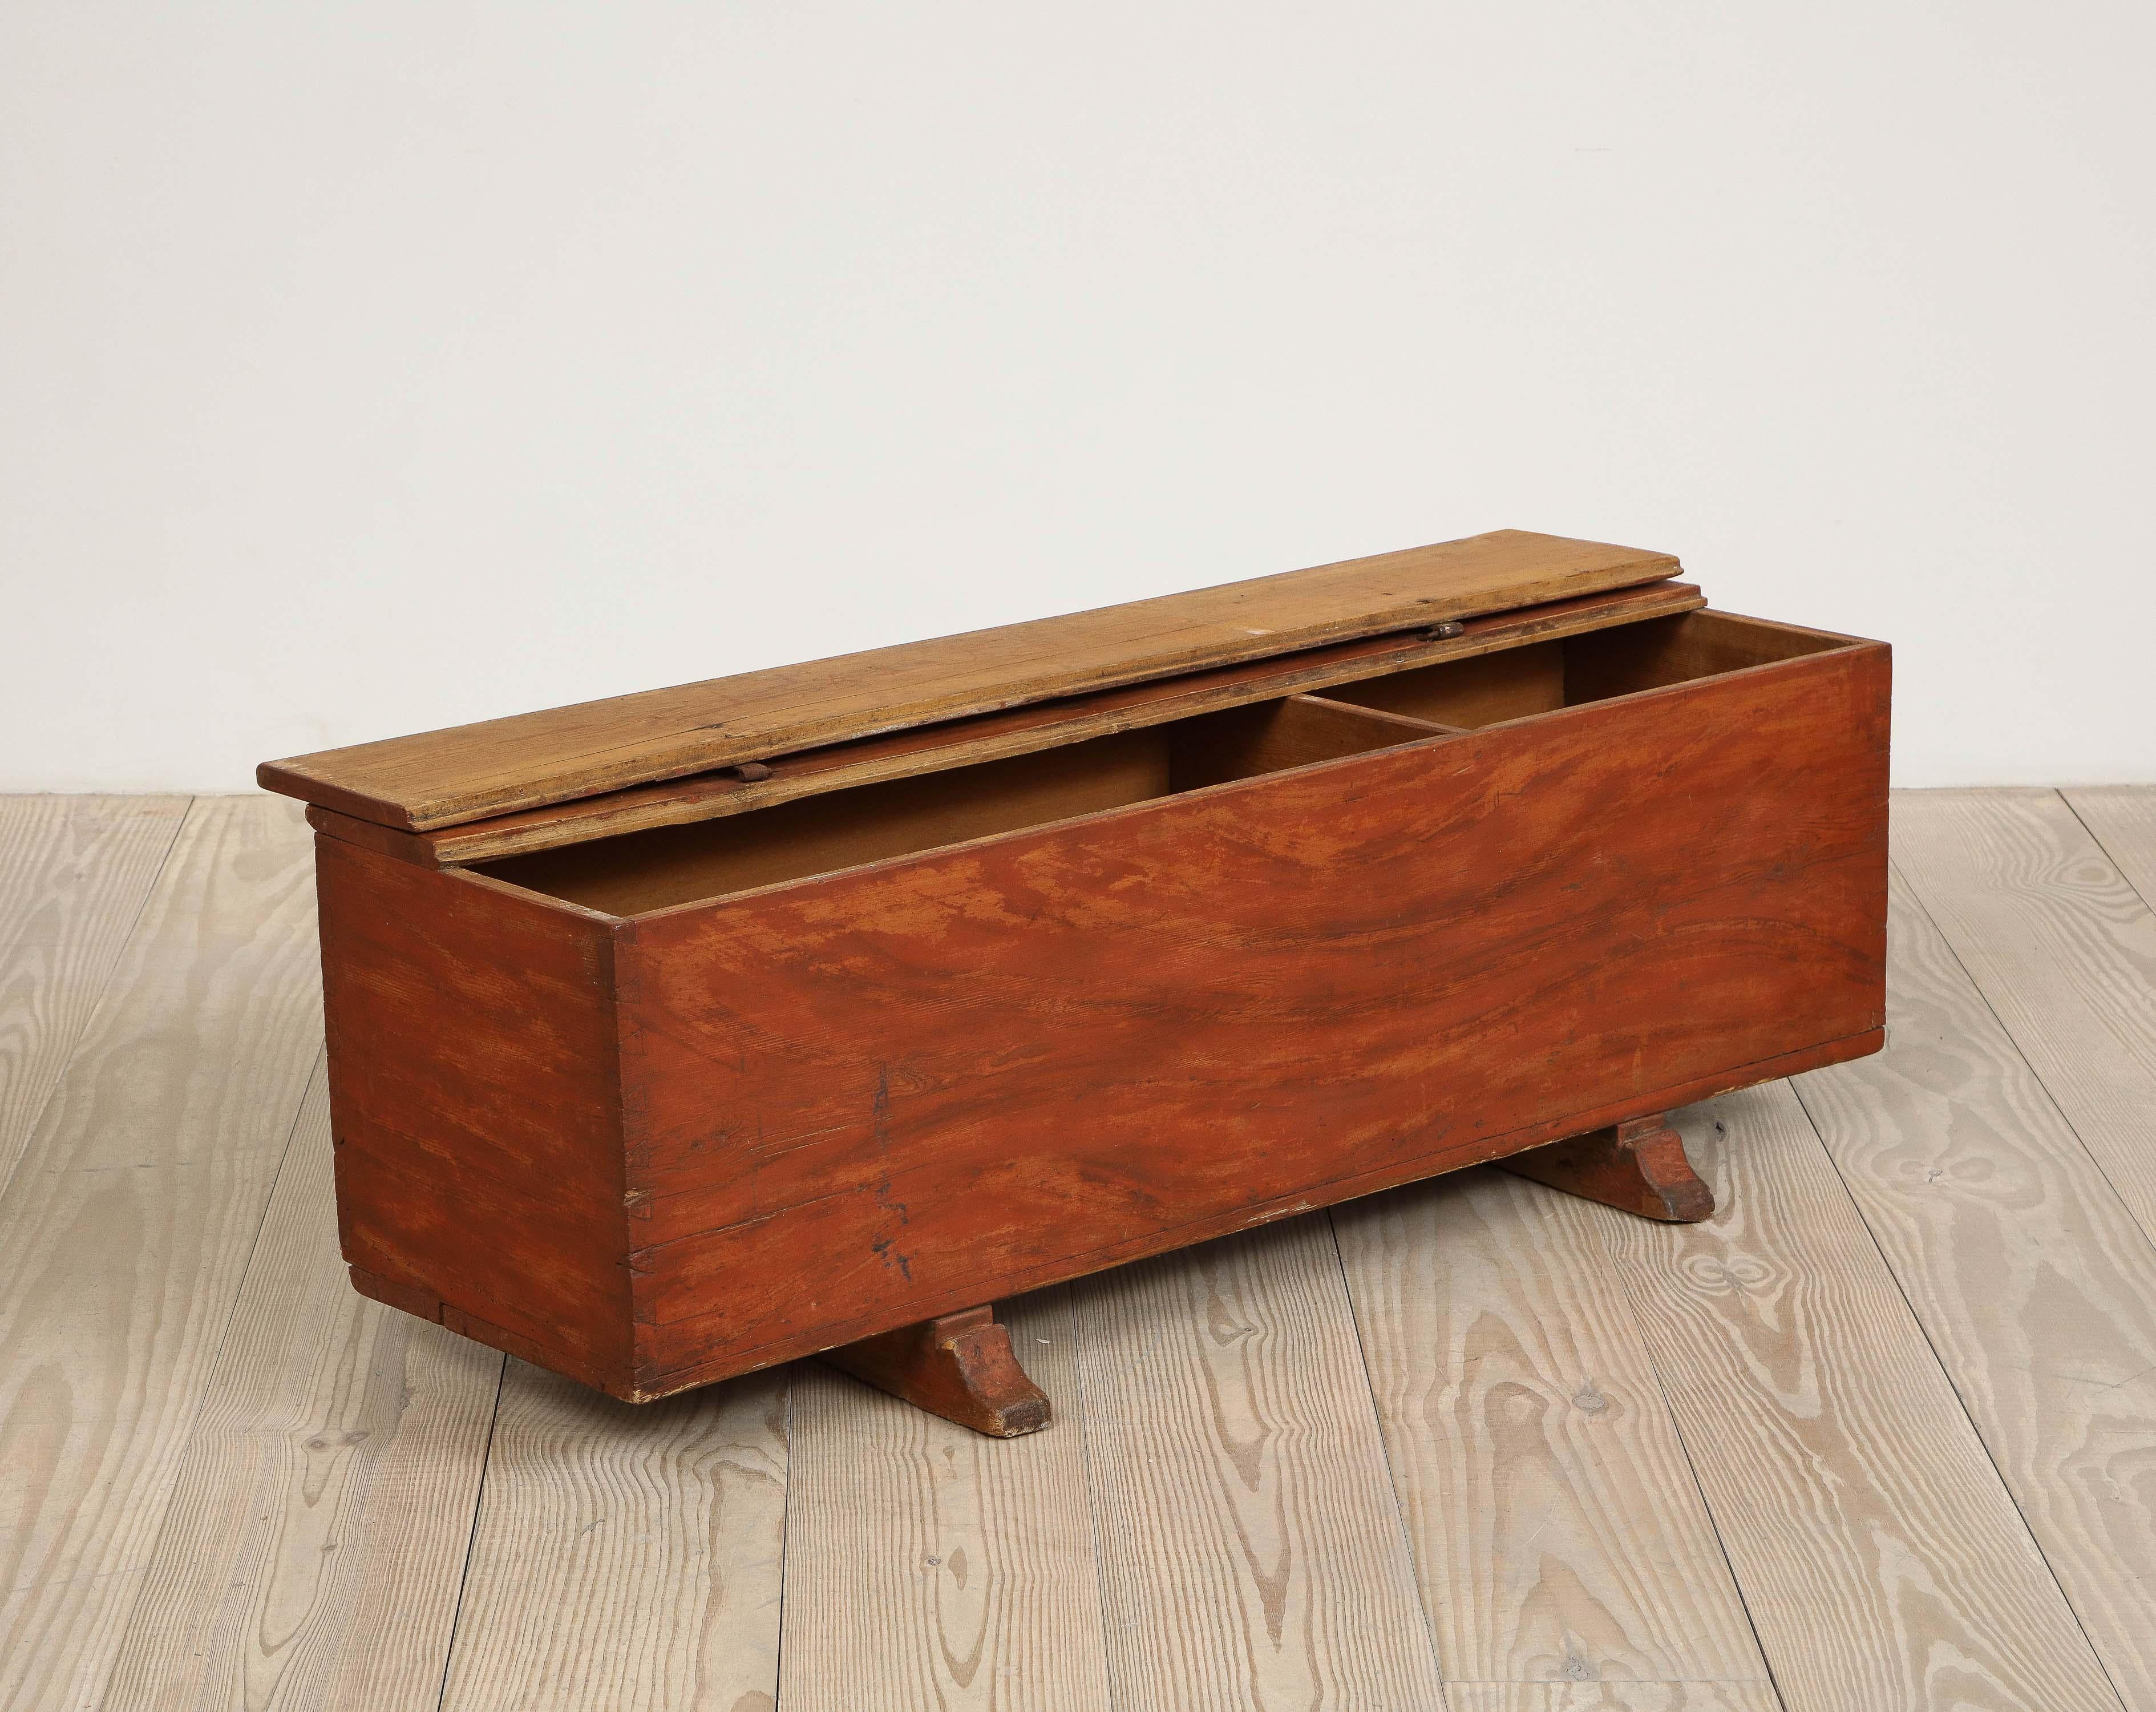 Swedish Allmoge Trunk or Bench with Faux Bois Painted Finish, Origin Sweden, circa 1800